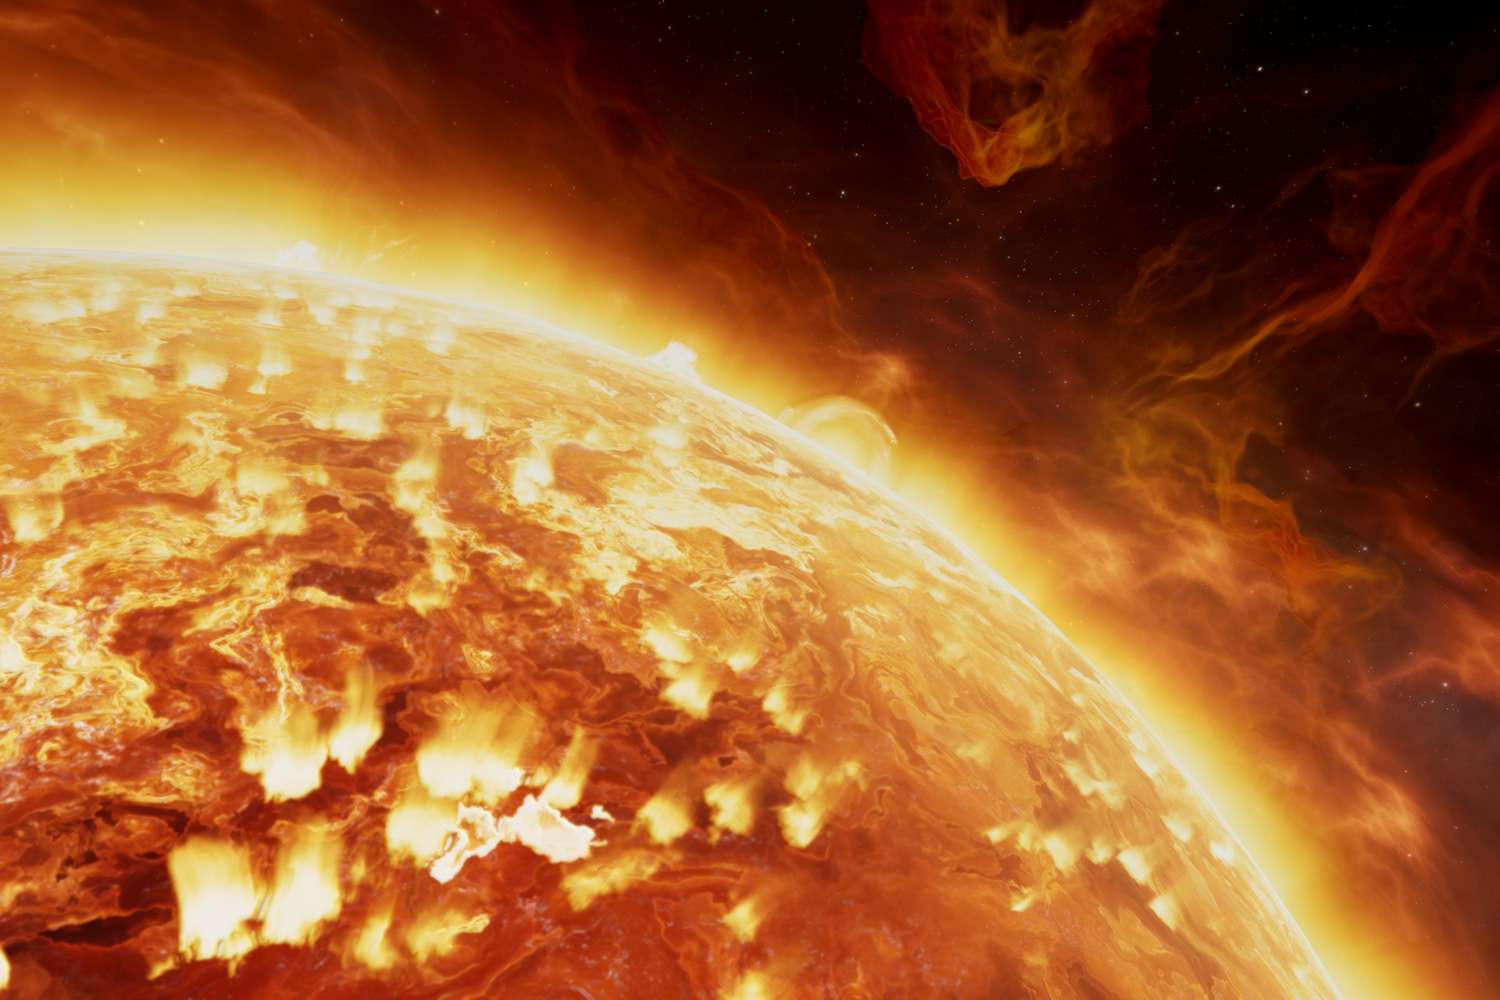 Are Solar Storms Dangerous to Humans on Earth? About the Effects, Including Possible Communication Disruption